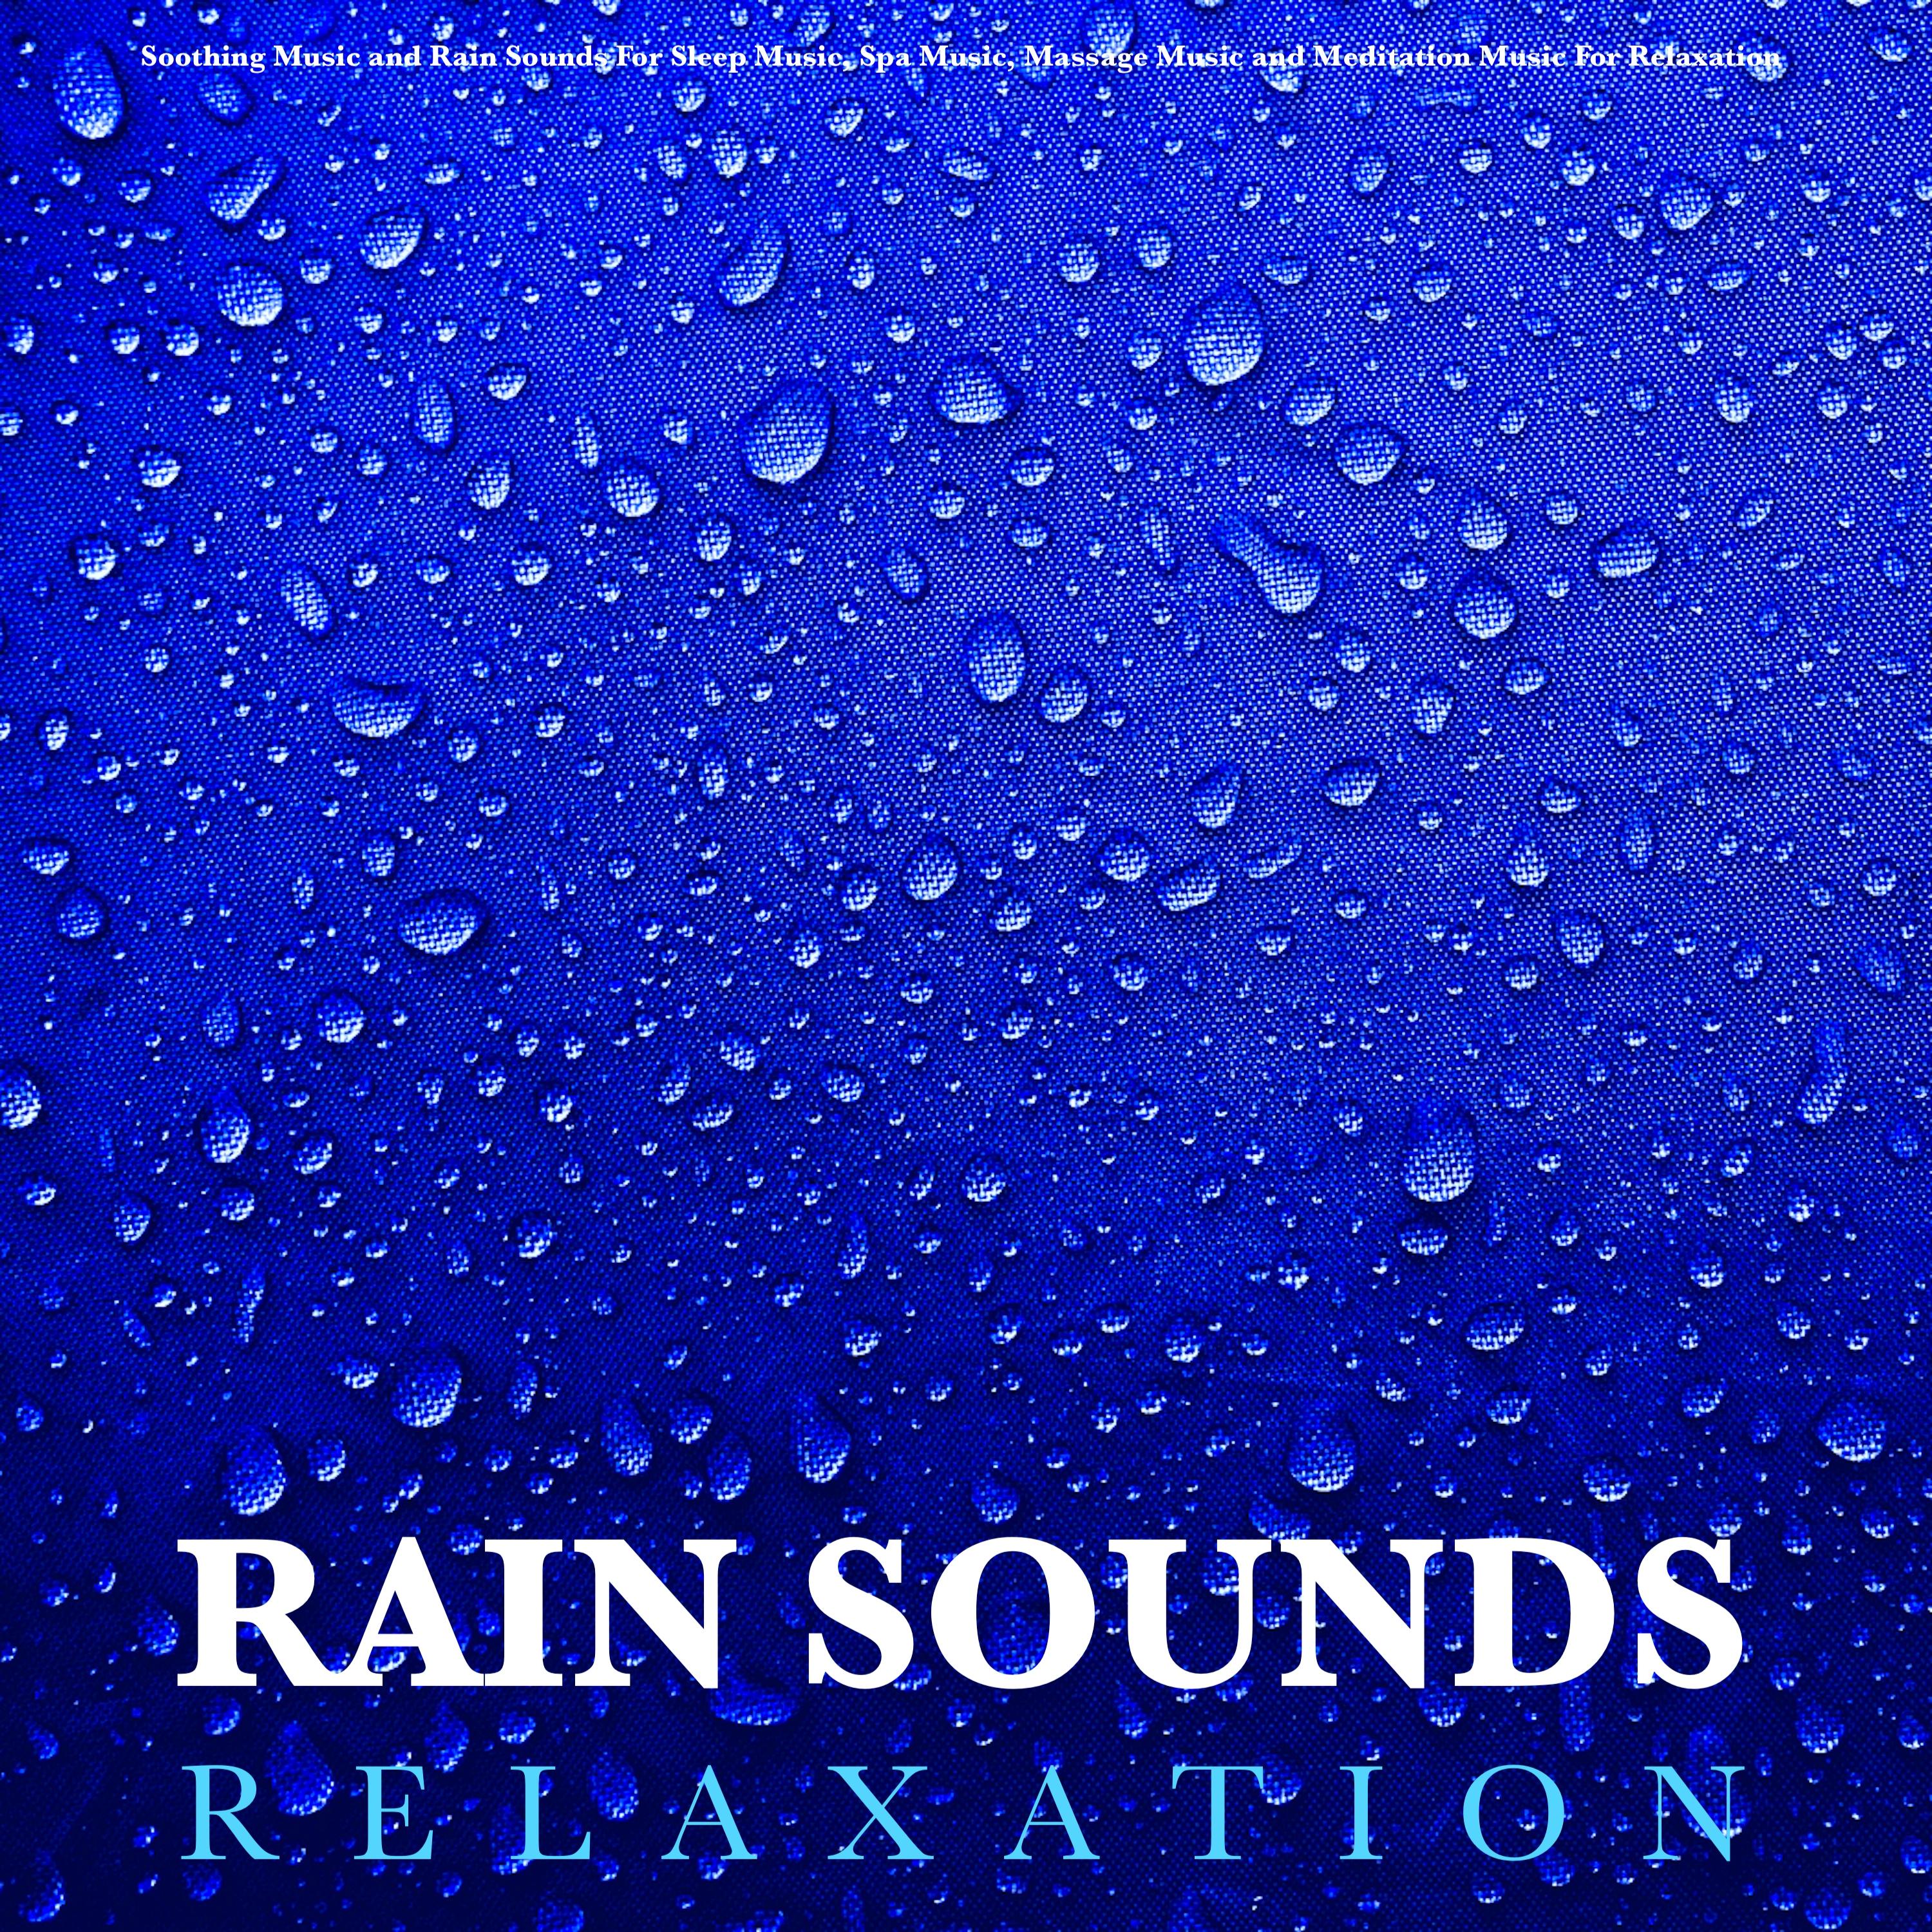 Rain Sounds Relaxation: Soothing Music and Rain Sounds For Sleep Music, Spa Music, Massage Music and Meditation Music For Relaxation